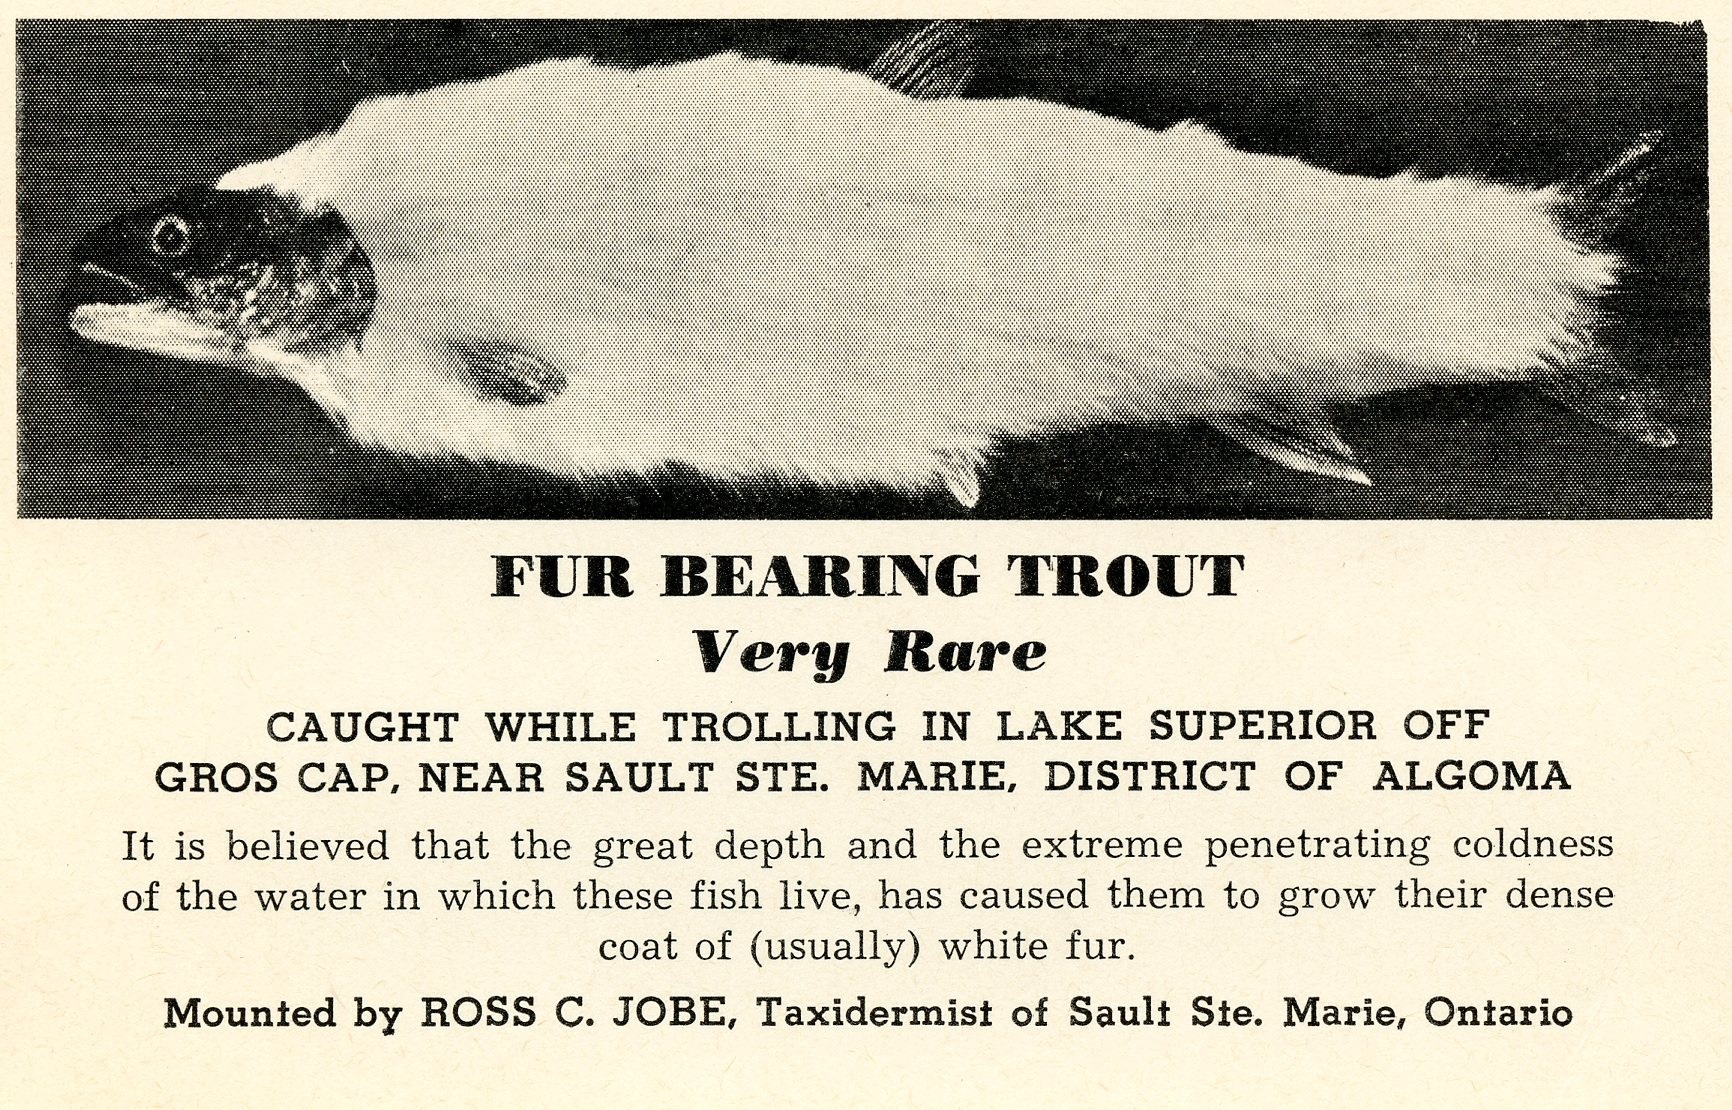 fur bearing trout, very rare. caught while trolling in lake superior off gros. cap, near sault ste. marie, district of algoma. it is believed that the great depth and the extreme penetrating coldness of the water in which these fish live, has caused them to grow their dense coat of usually white fur.